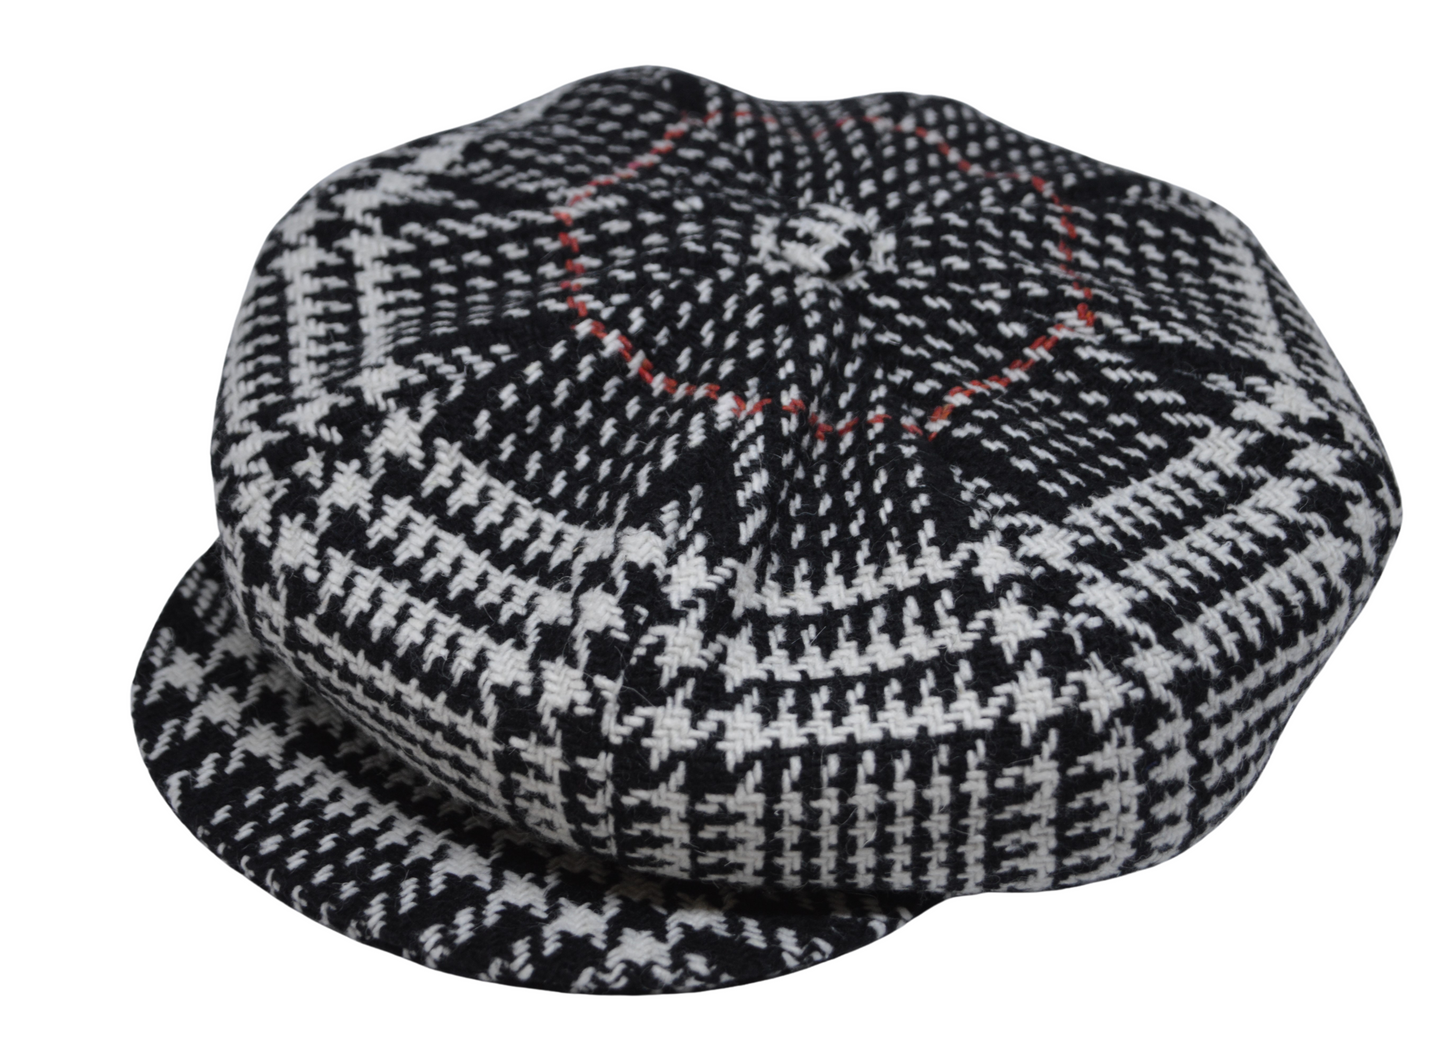 'Meusa' flat cap in Black and White Check Wool